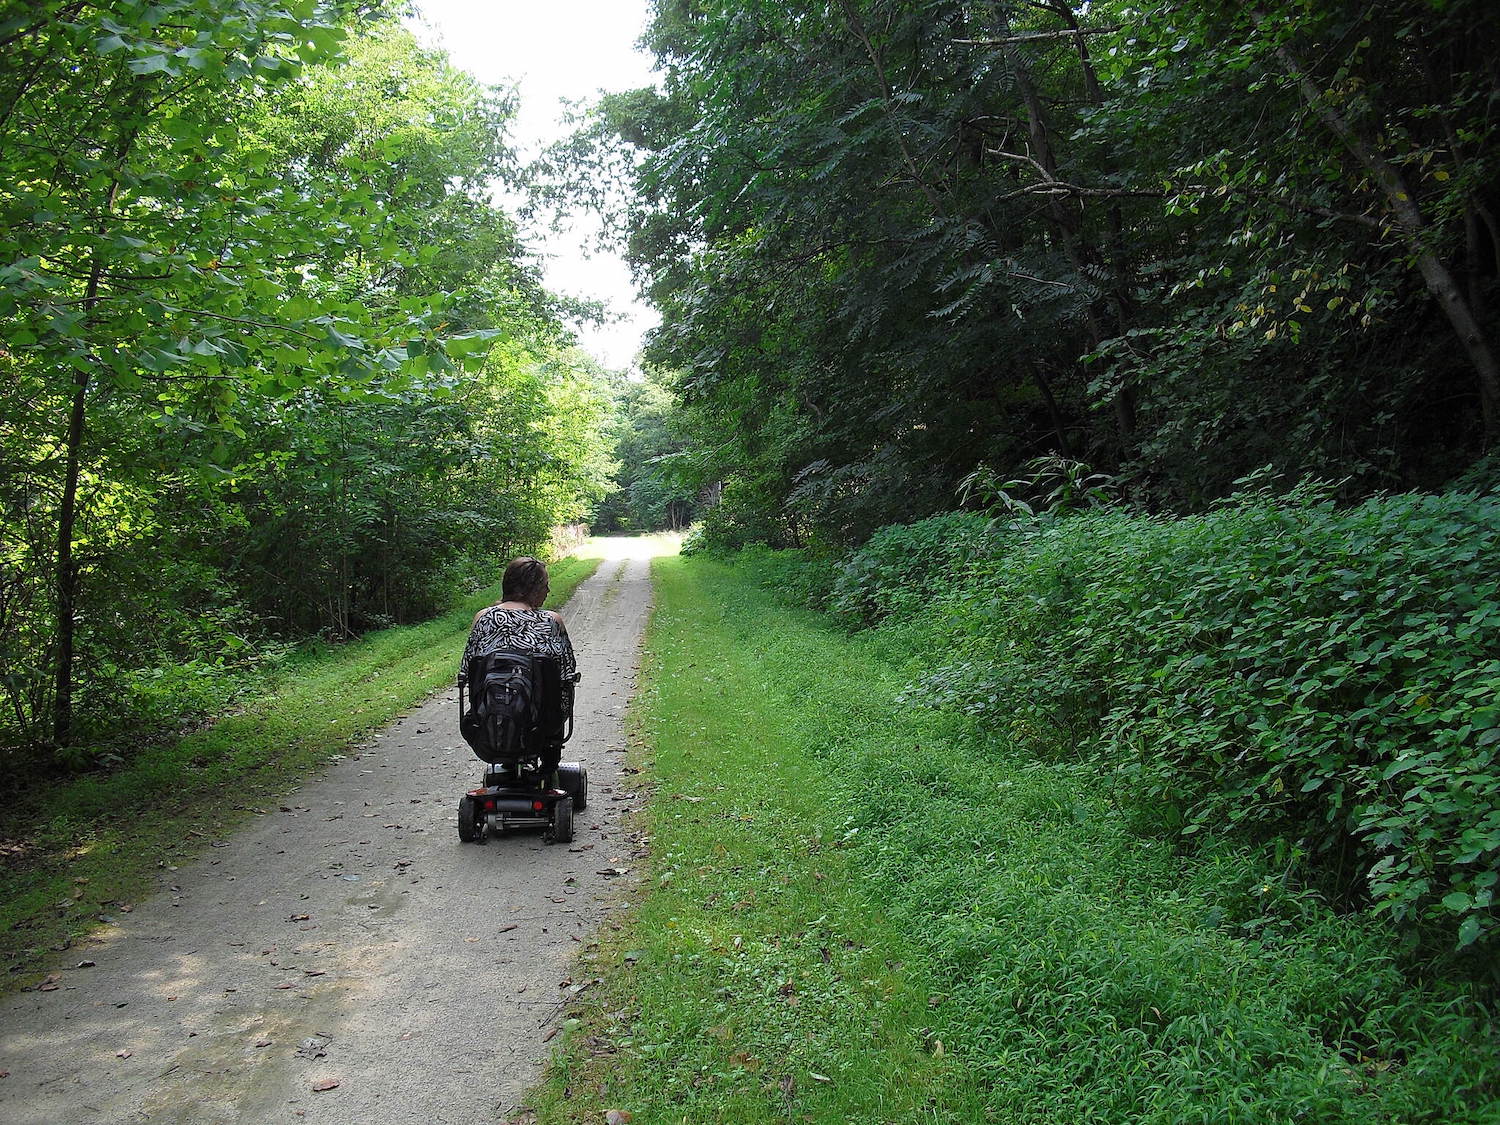 Maryland's Great Allegheny Passage (gaptrail.org) | Photo by TrailLink user brian.mccaulley